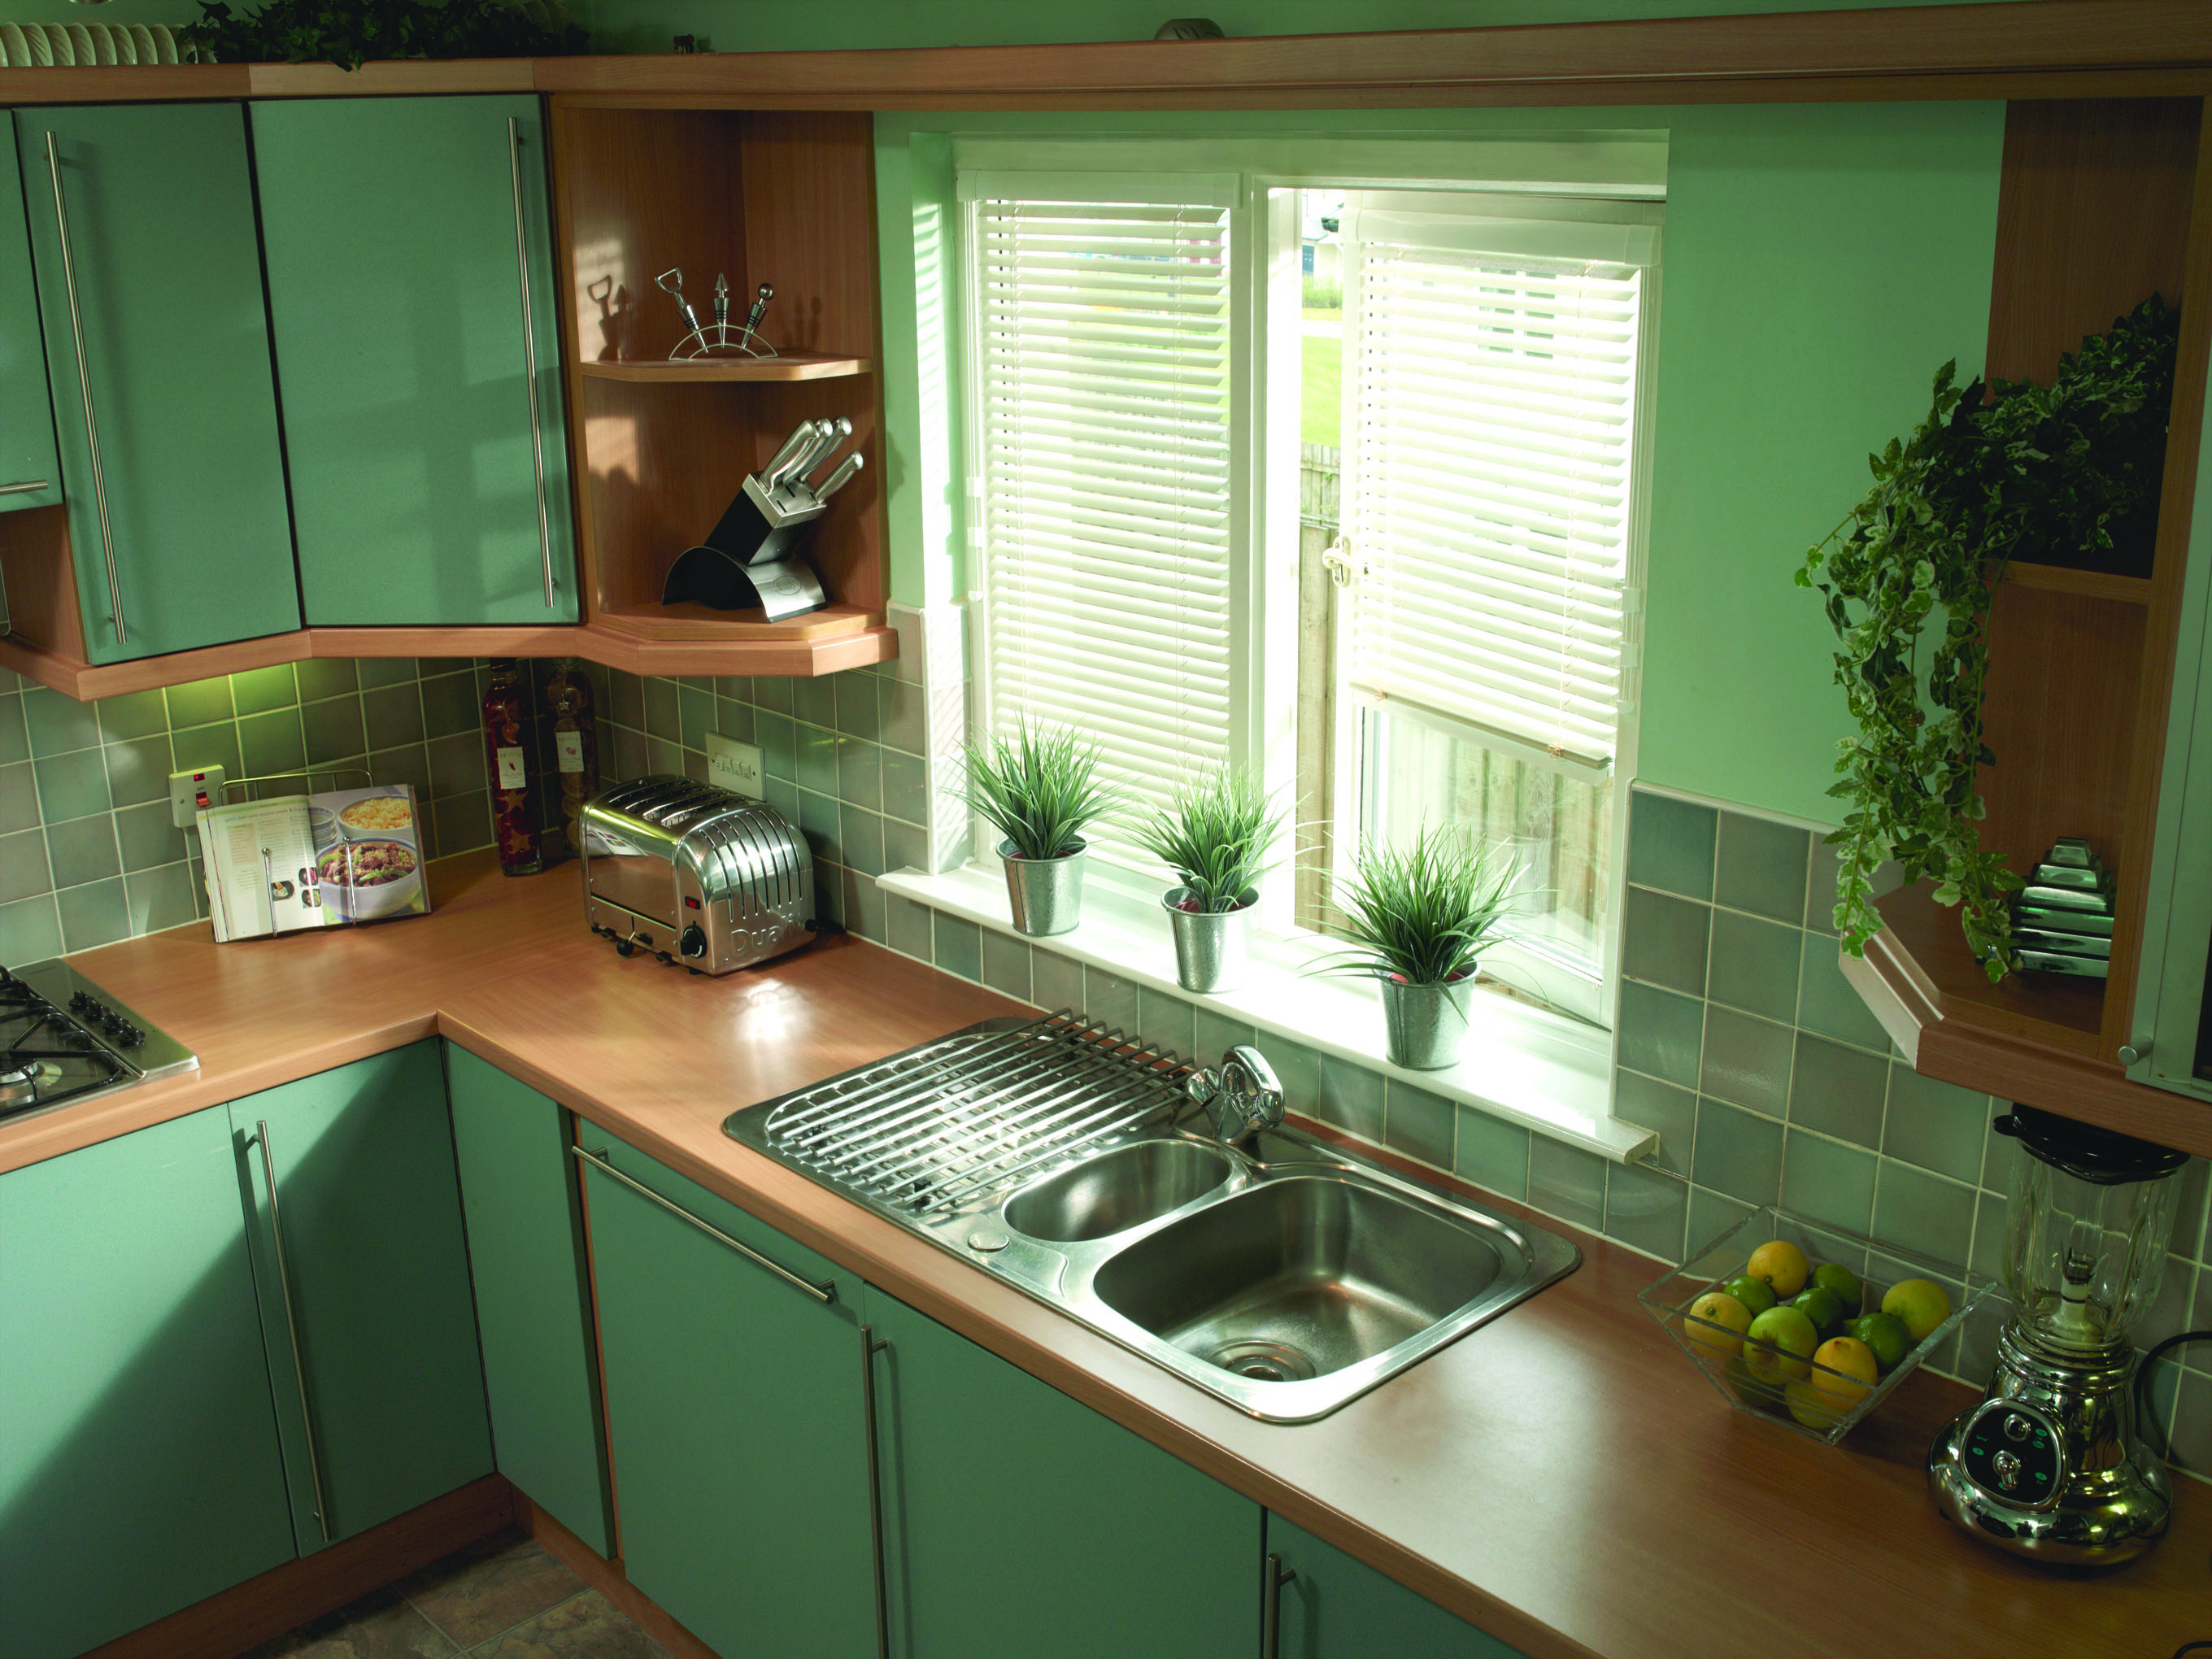 Window blinds Coventry. Venetian white blinds in green kitchen.